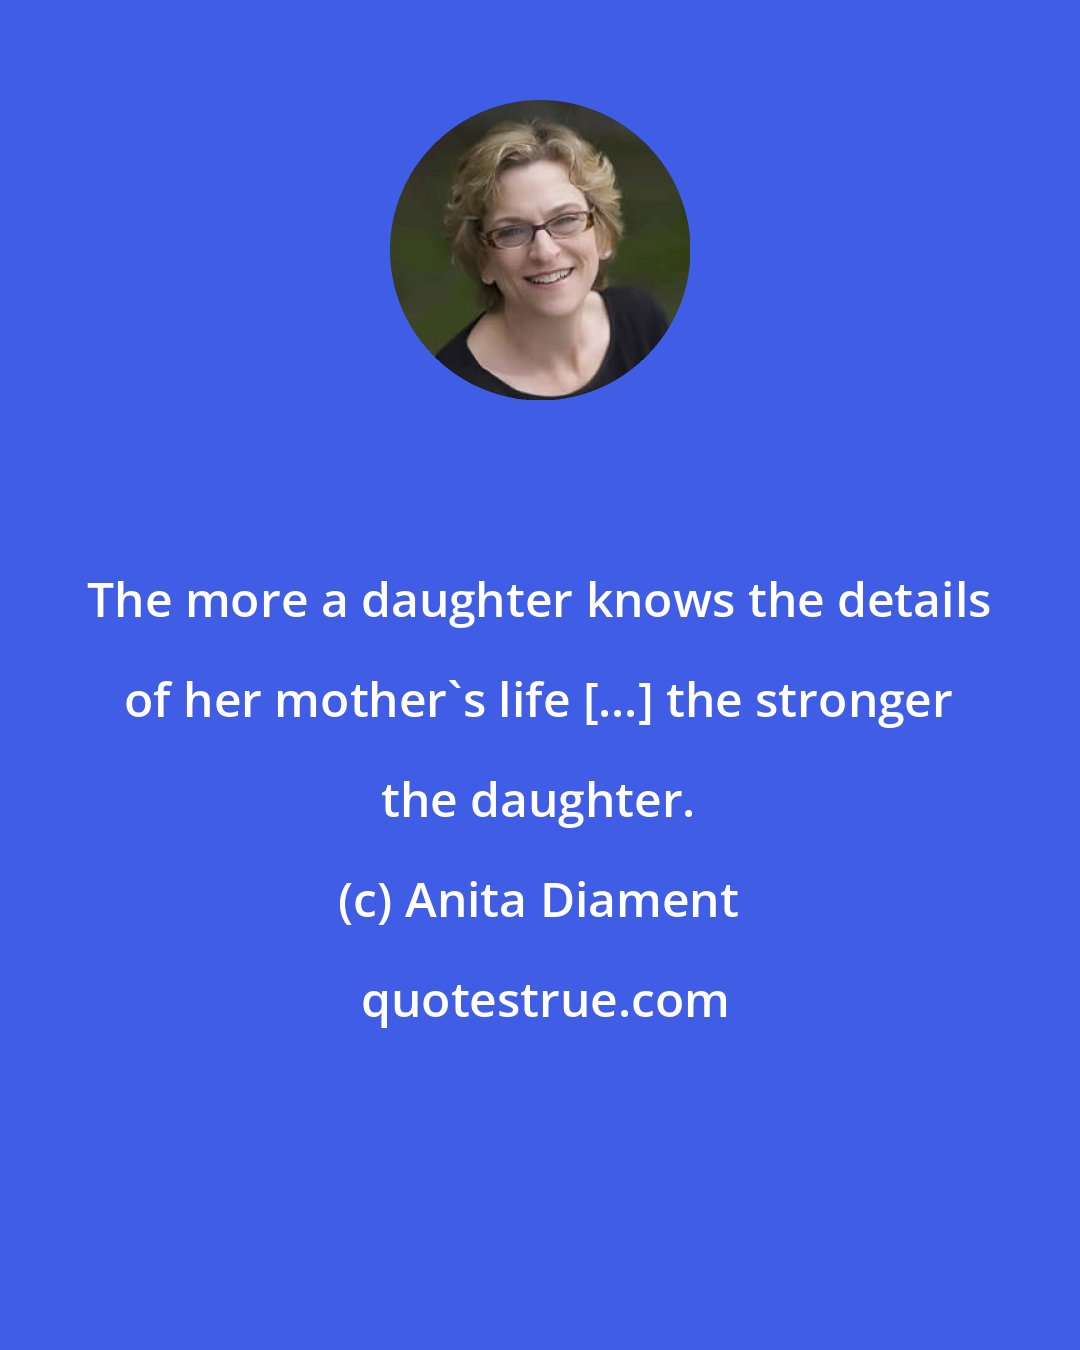 Anita Diament: The more a daughter knows the details of her mother's life [...] the stronger the daughter.